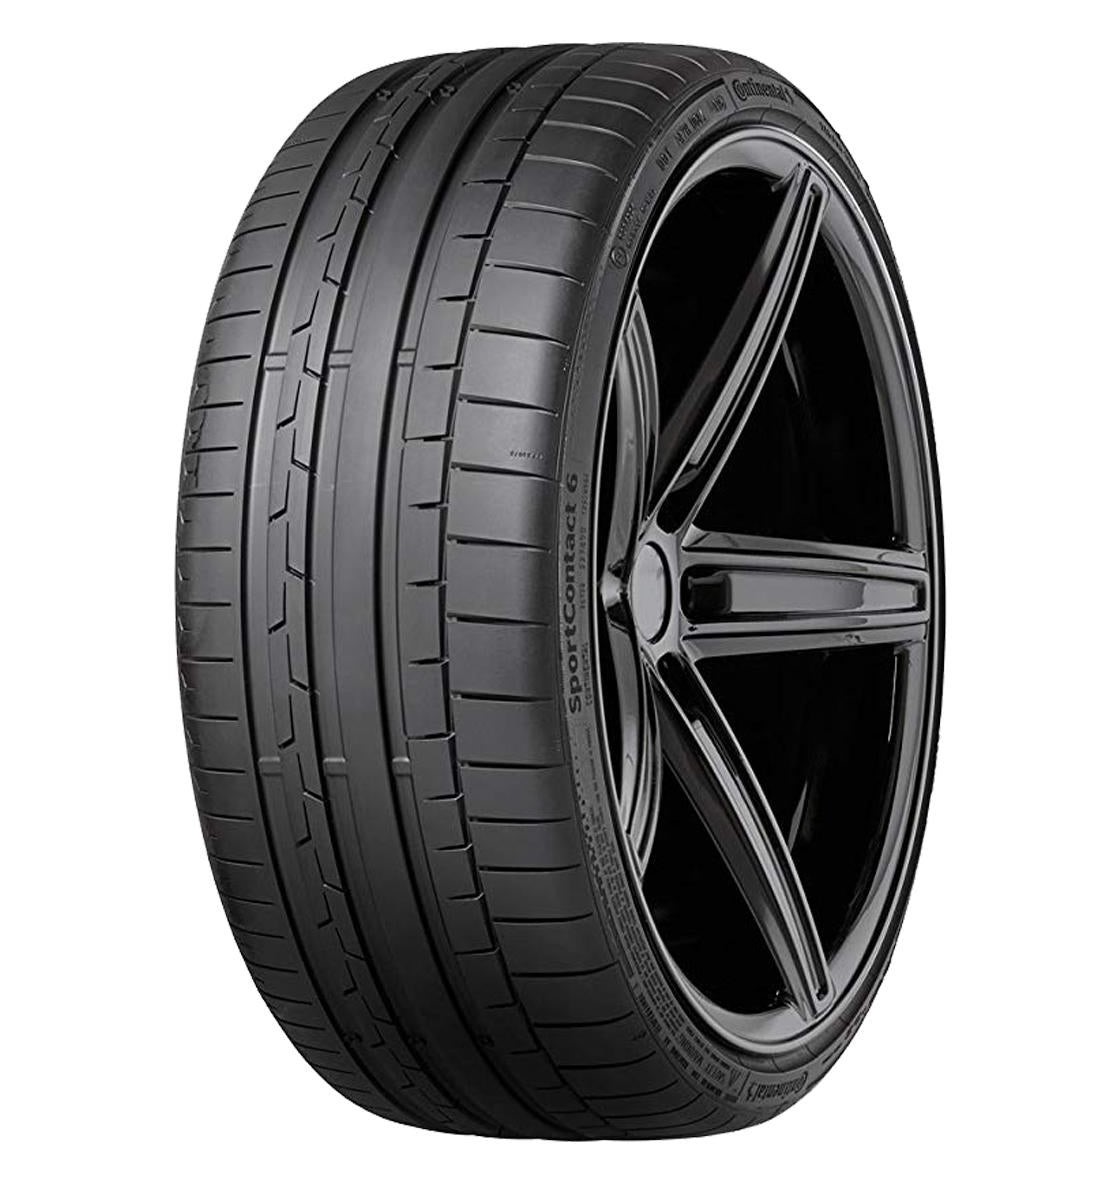 SportContact 6 MO-S SIL 275/45R21